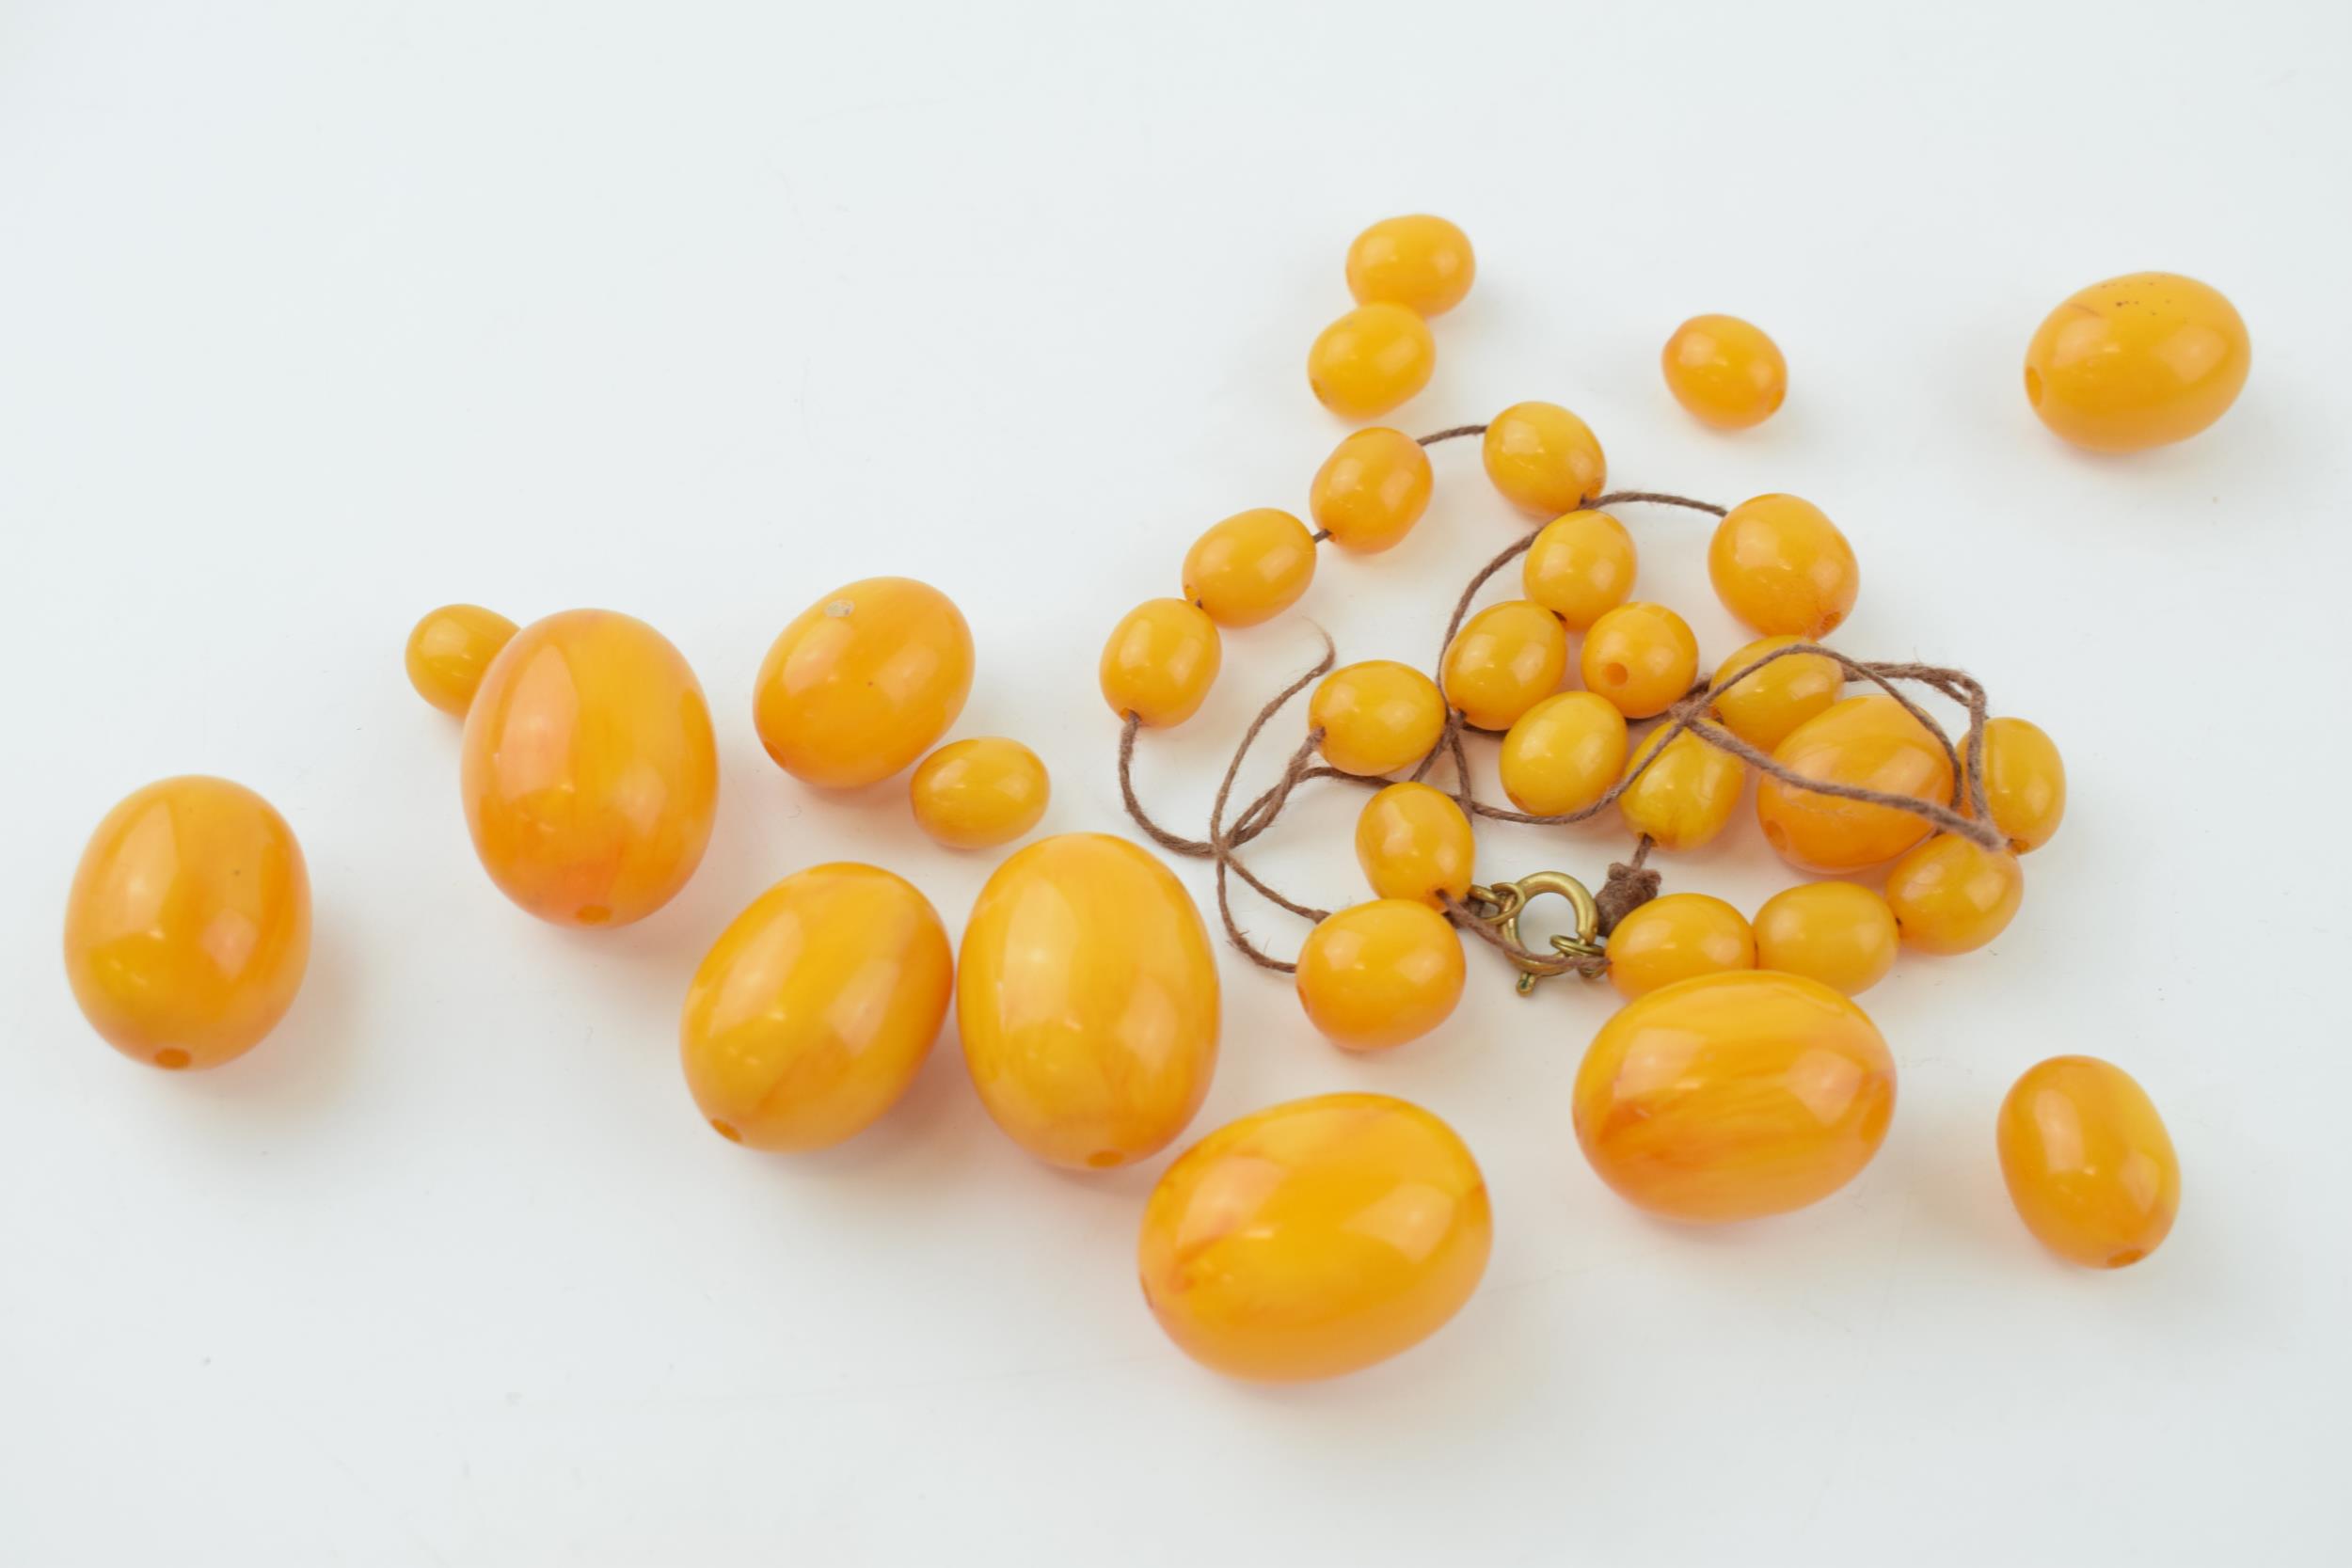 Butterscotch amber similar graduated necklace beads. Weight 84 grams. beads good but a/f have become - Image 4 of 11